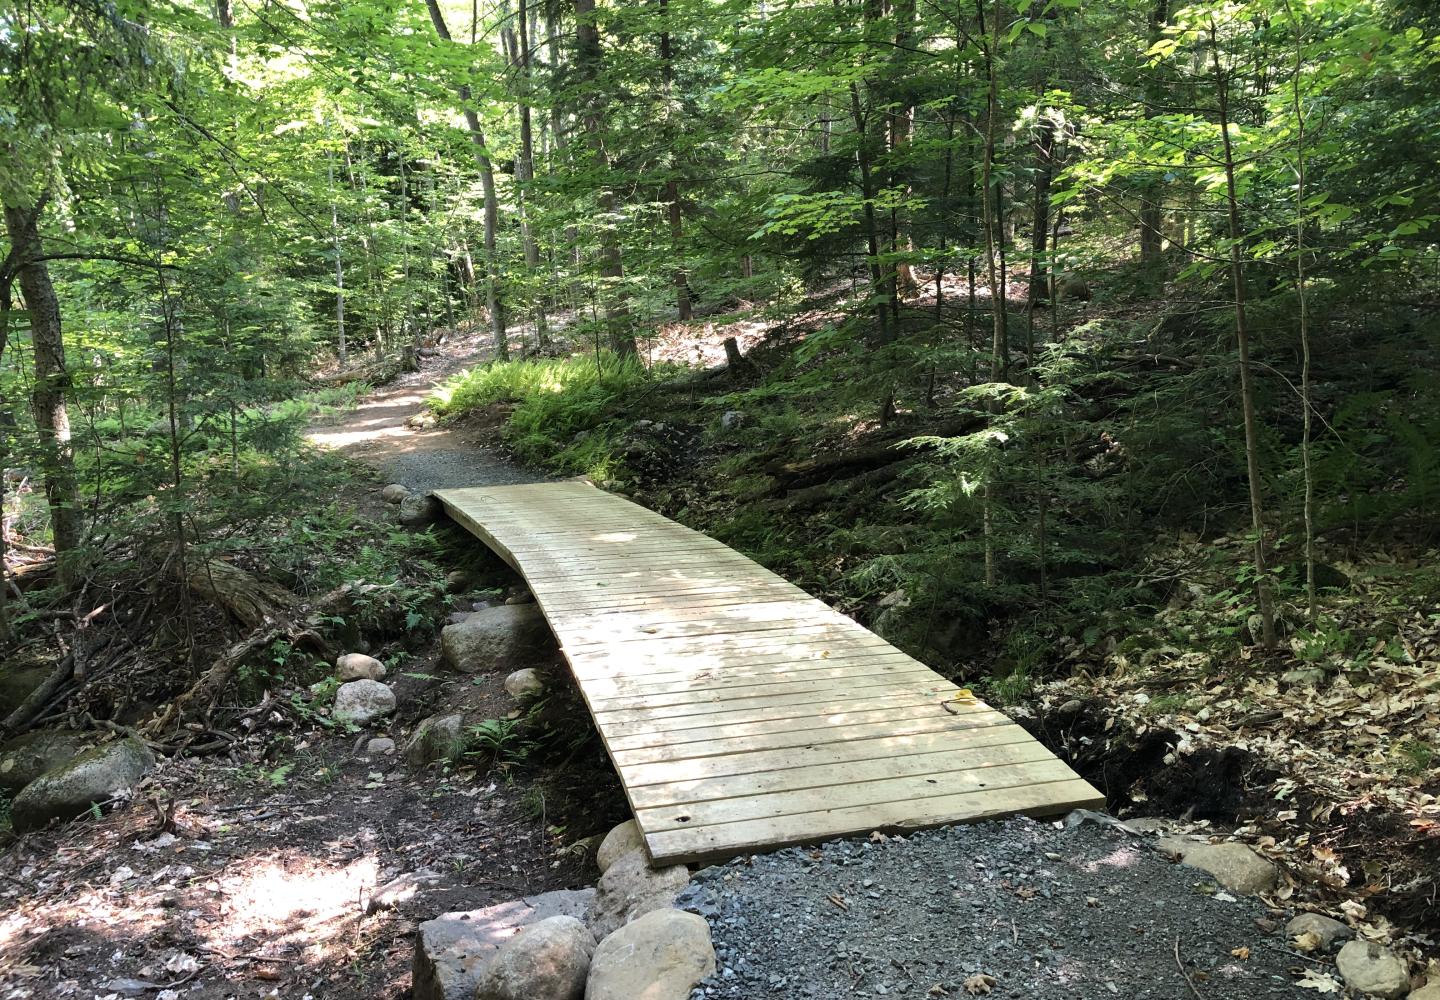 A new bridge connects sections of trail Elizabethtown.